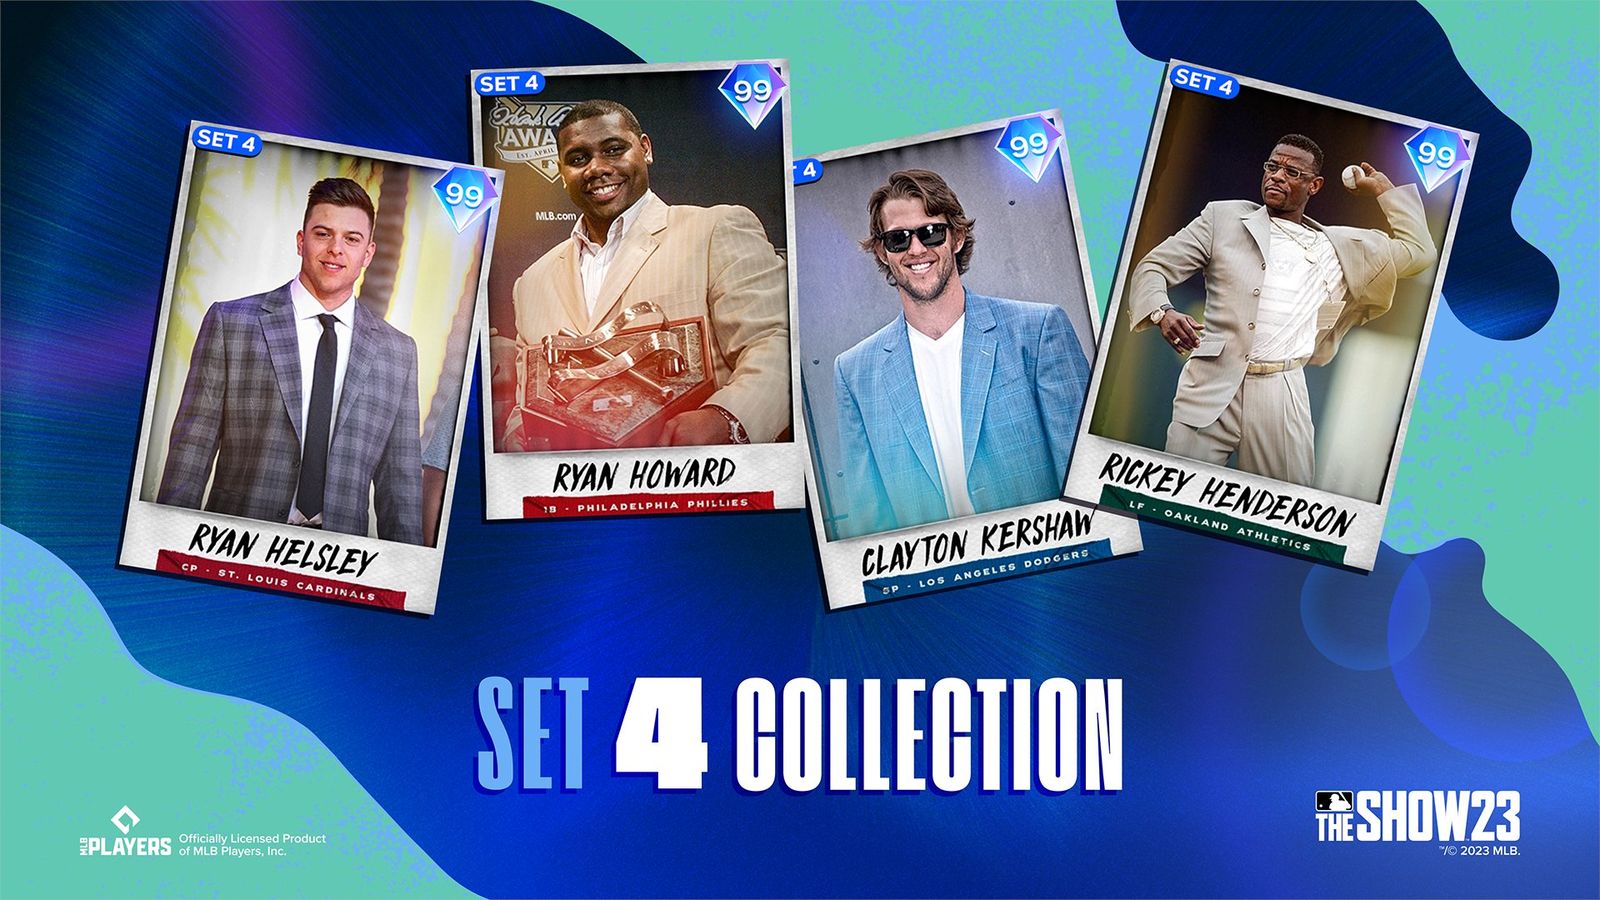 MLB The Show 23 Set 4 collection